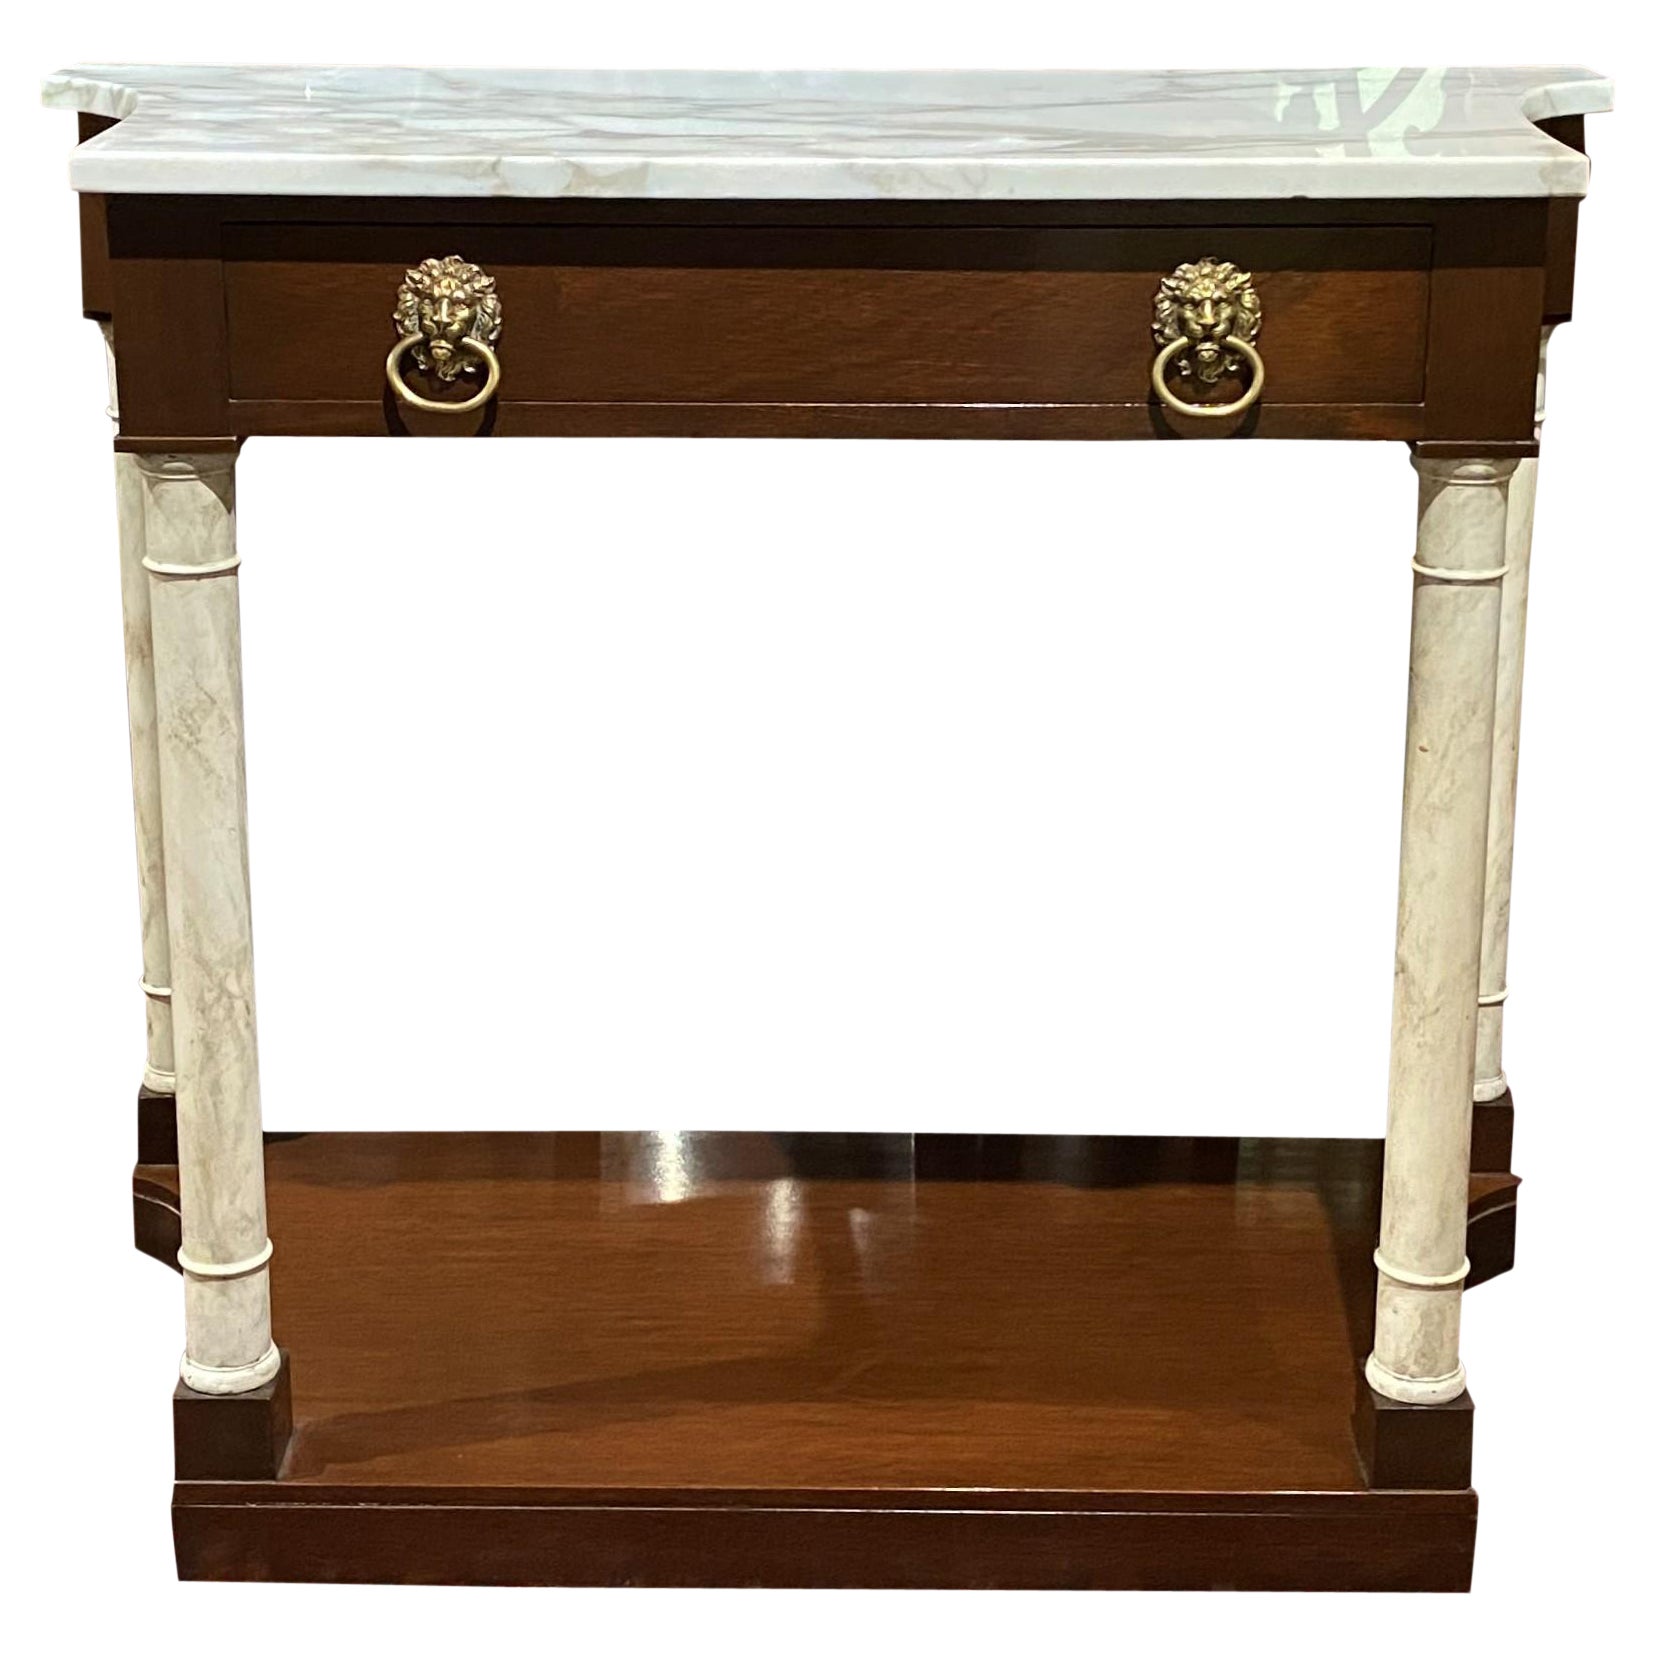 Kittinger Custom Marble Top Classical Style Mahogany Console with Pilasters